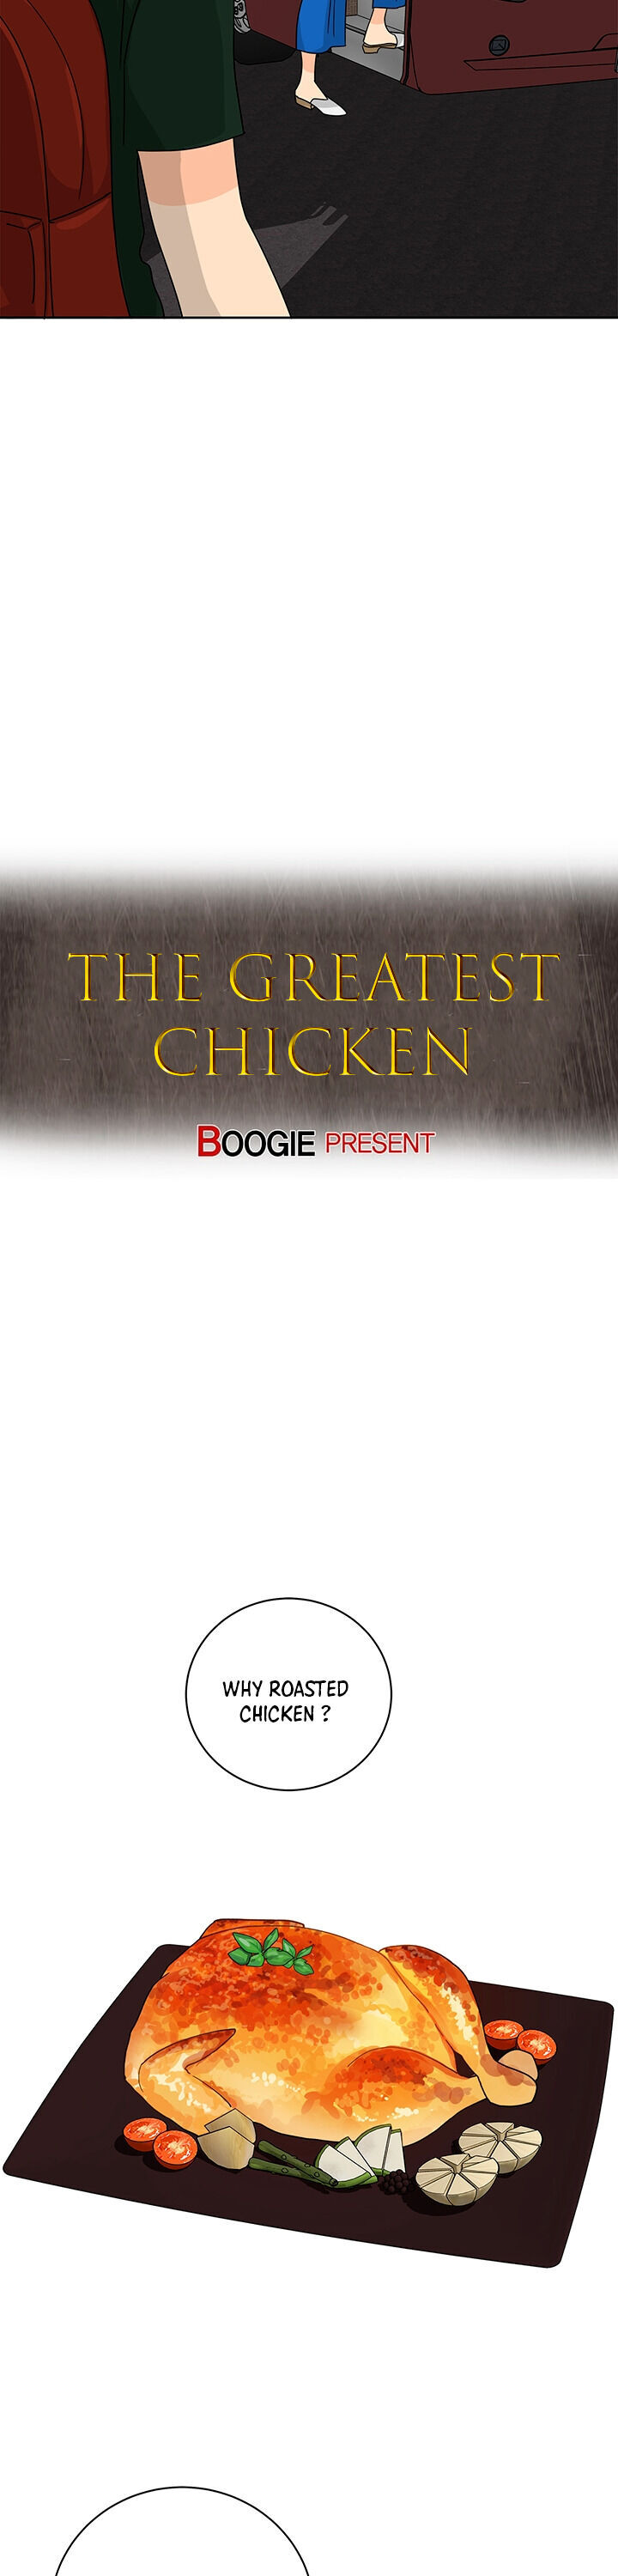 The Greatest Chicken - Page 2